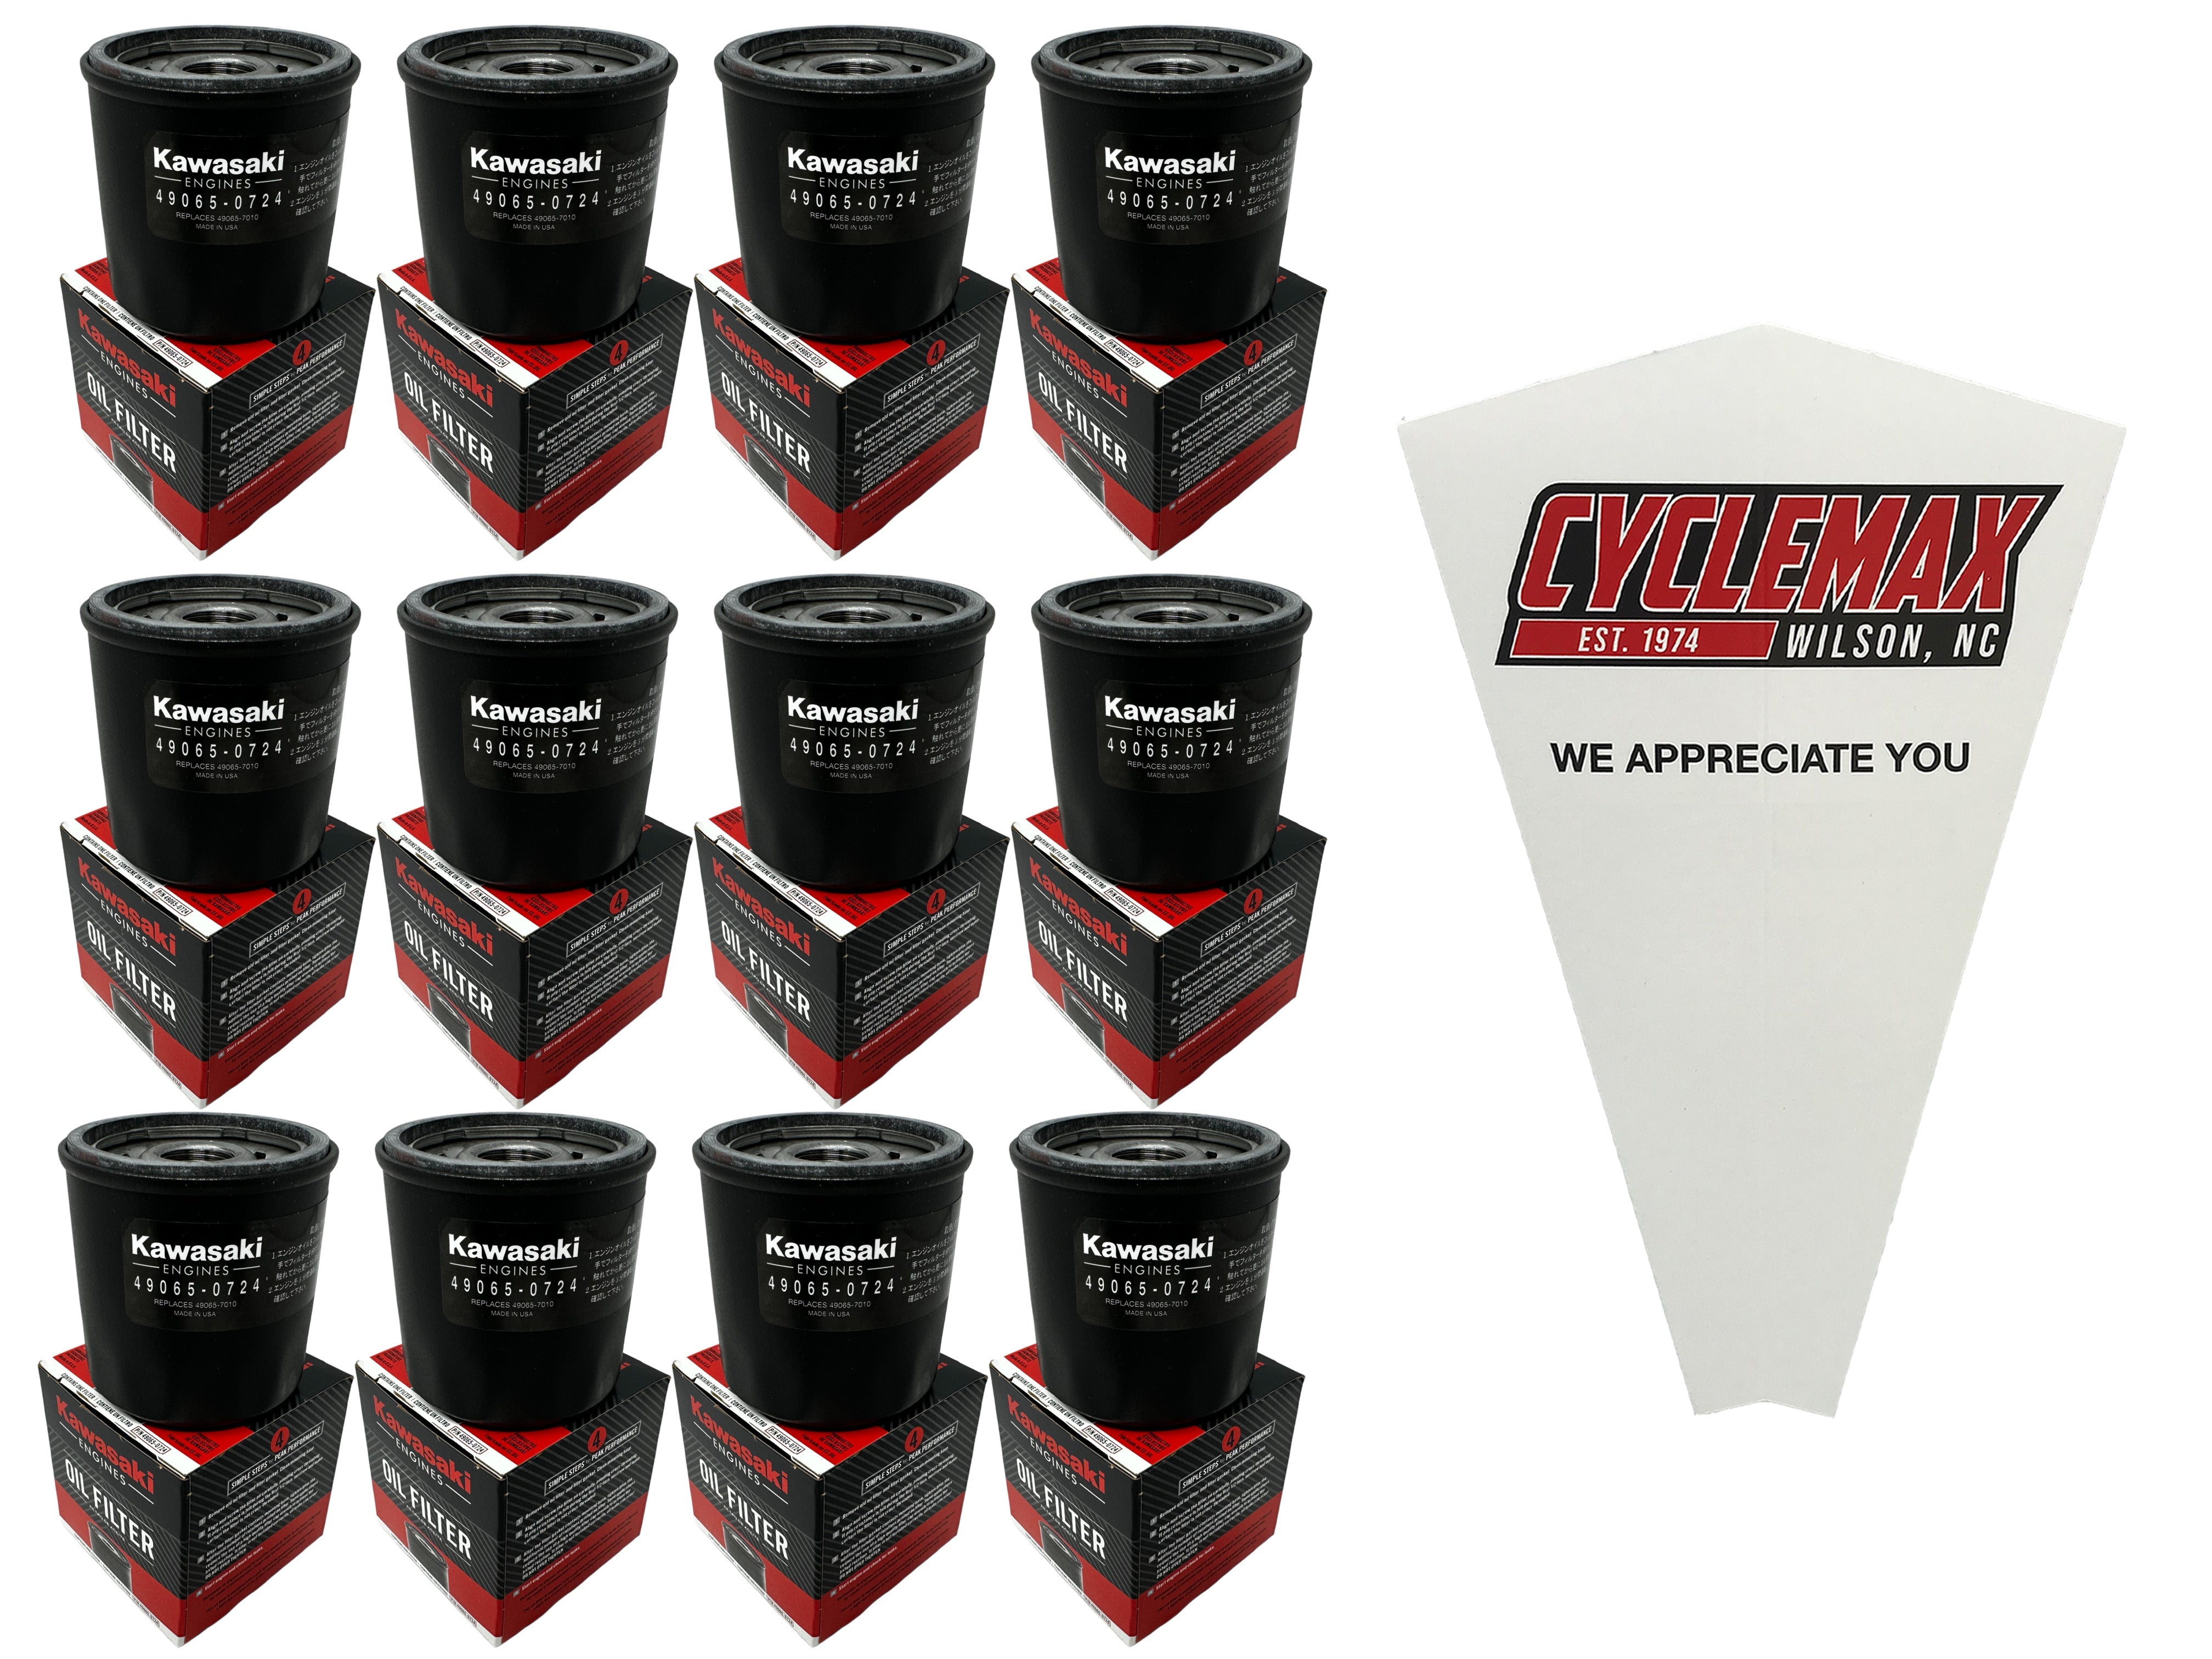 Cyclemax Twelve Pack for Kawasaki Oil Filter 49065-0724 Contains Twelve Filters and a Funnel